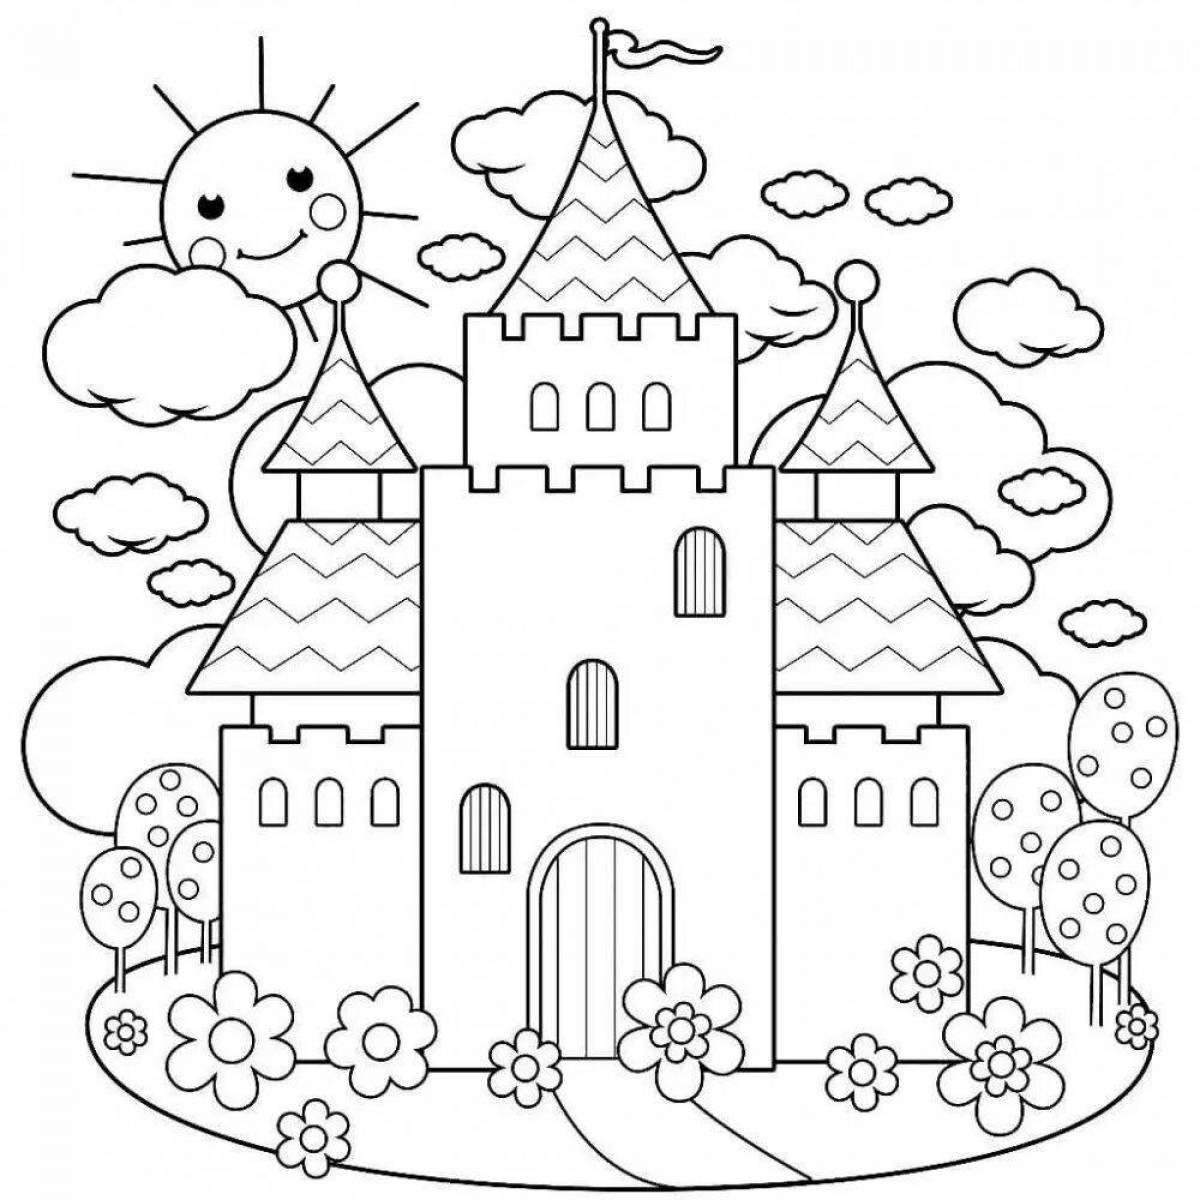 Coloring book shining castles for girls